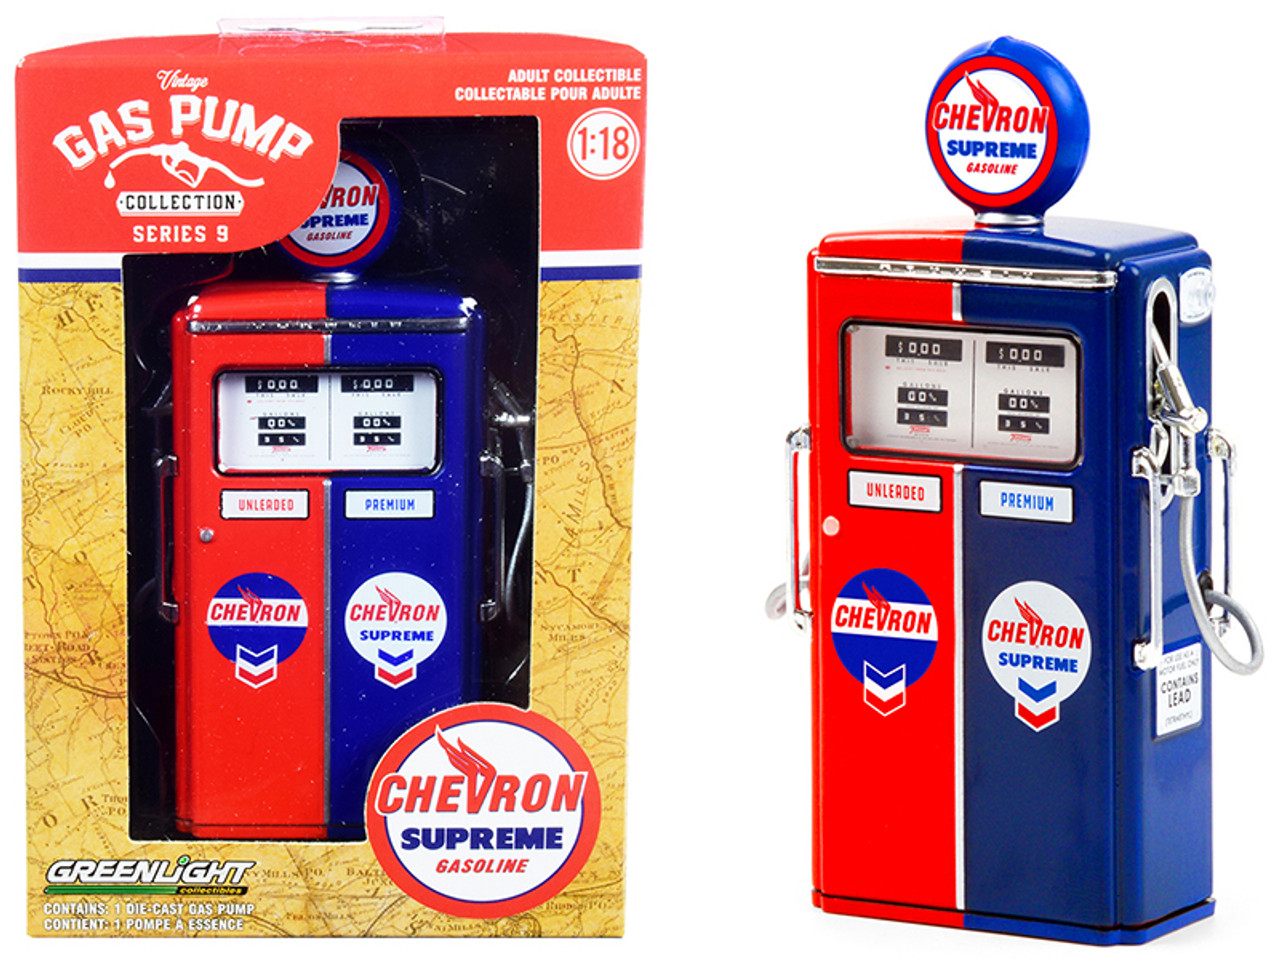 1954 Tokheim 350 Twin Gas Pump "Chevron Supreme" Red and Blue "Vintage Gas Pumps" Series 9 1/18 Diecast Model by Greenlight